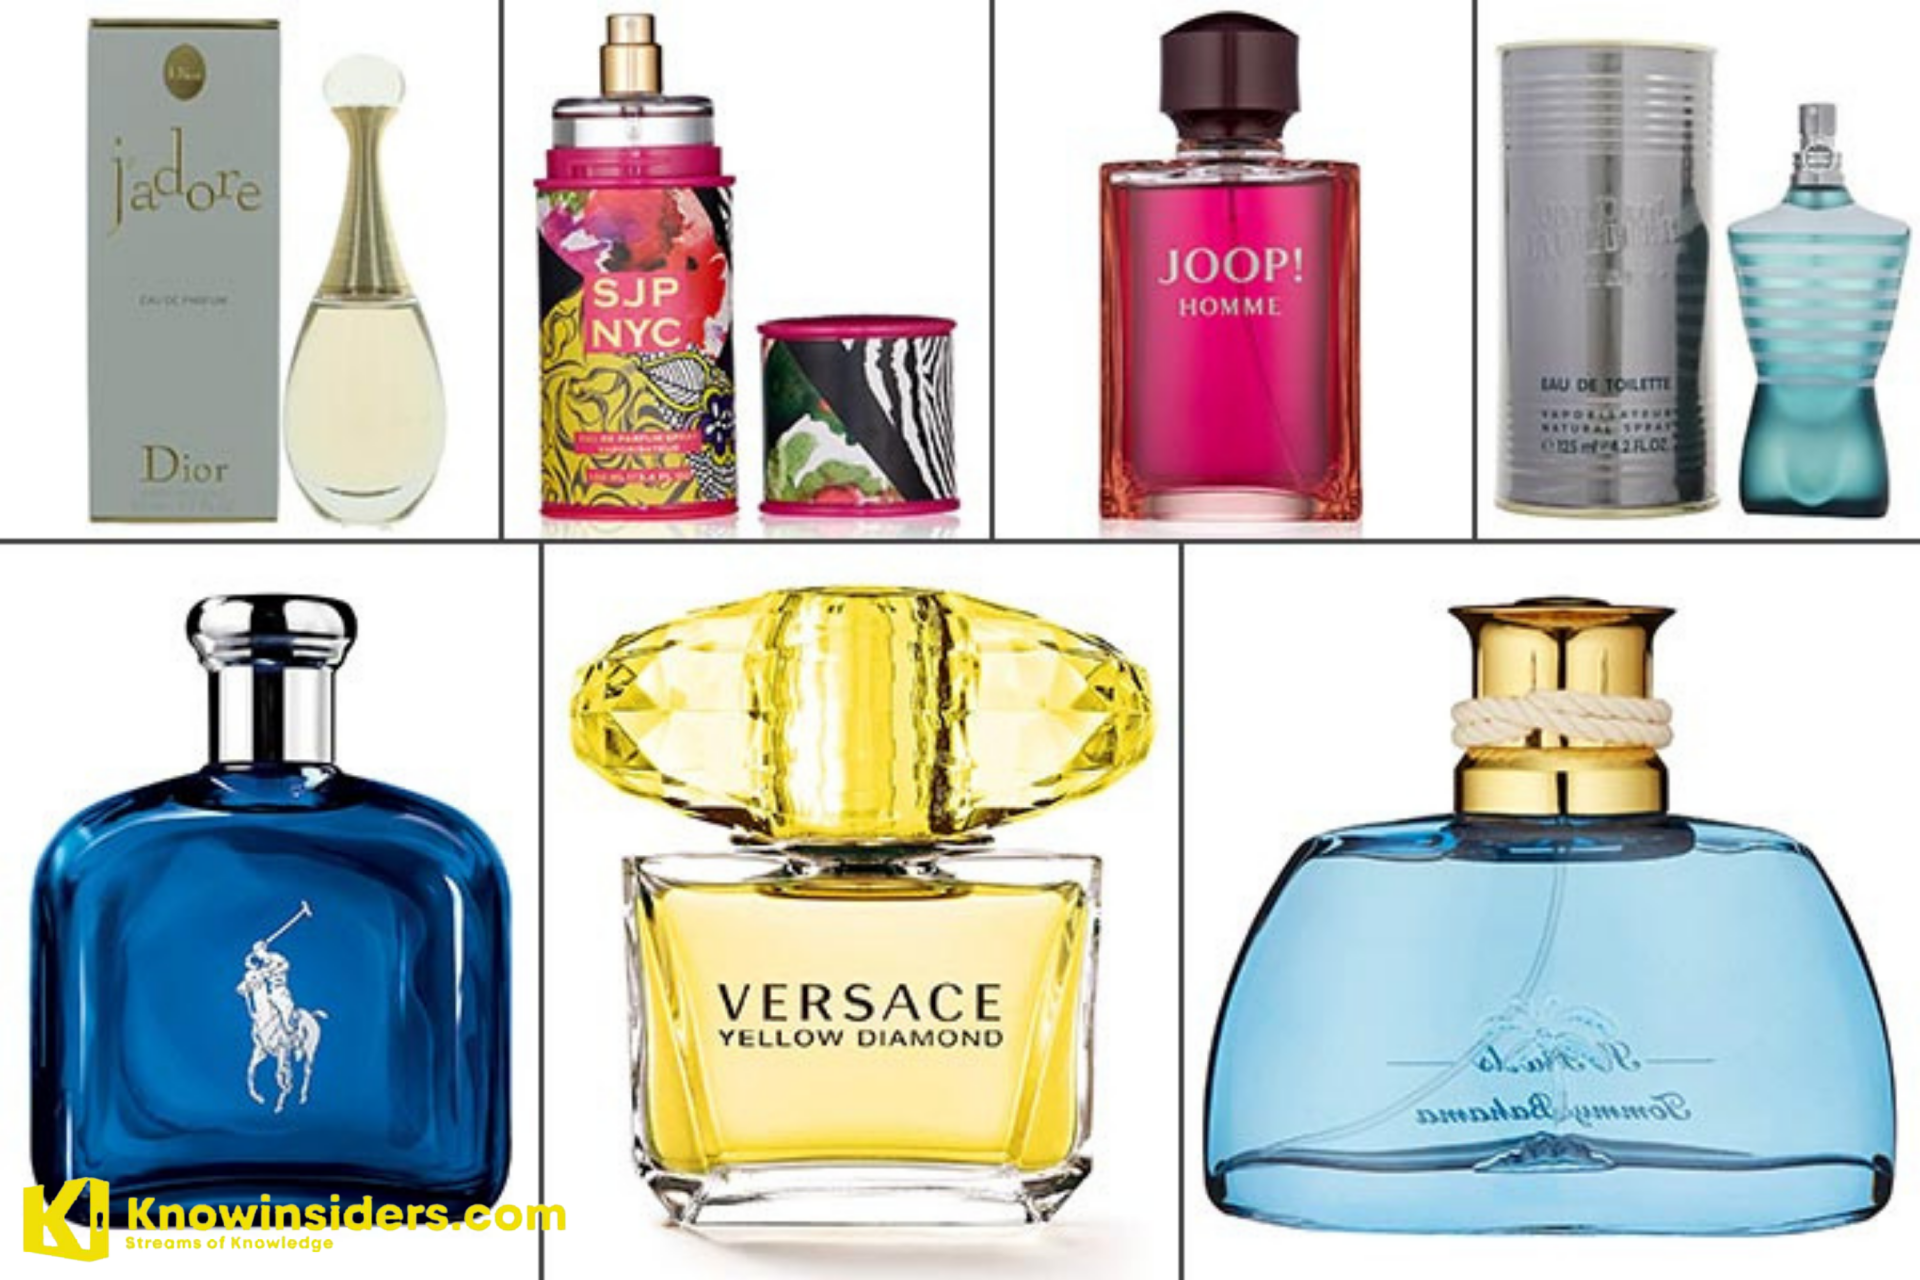 Top 5 Most Popular Perfumes for Women Under 35